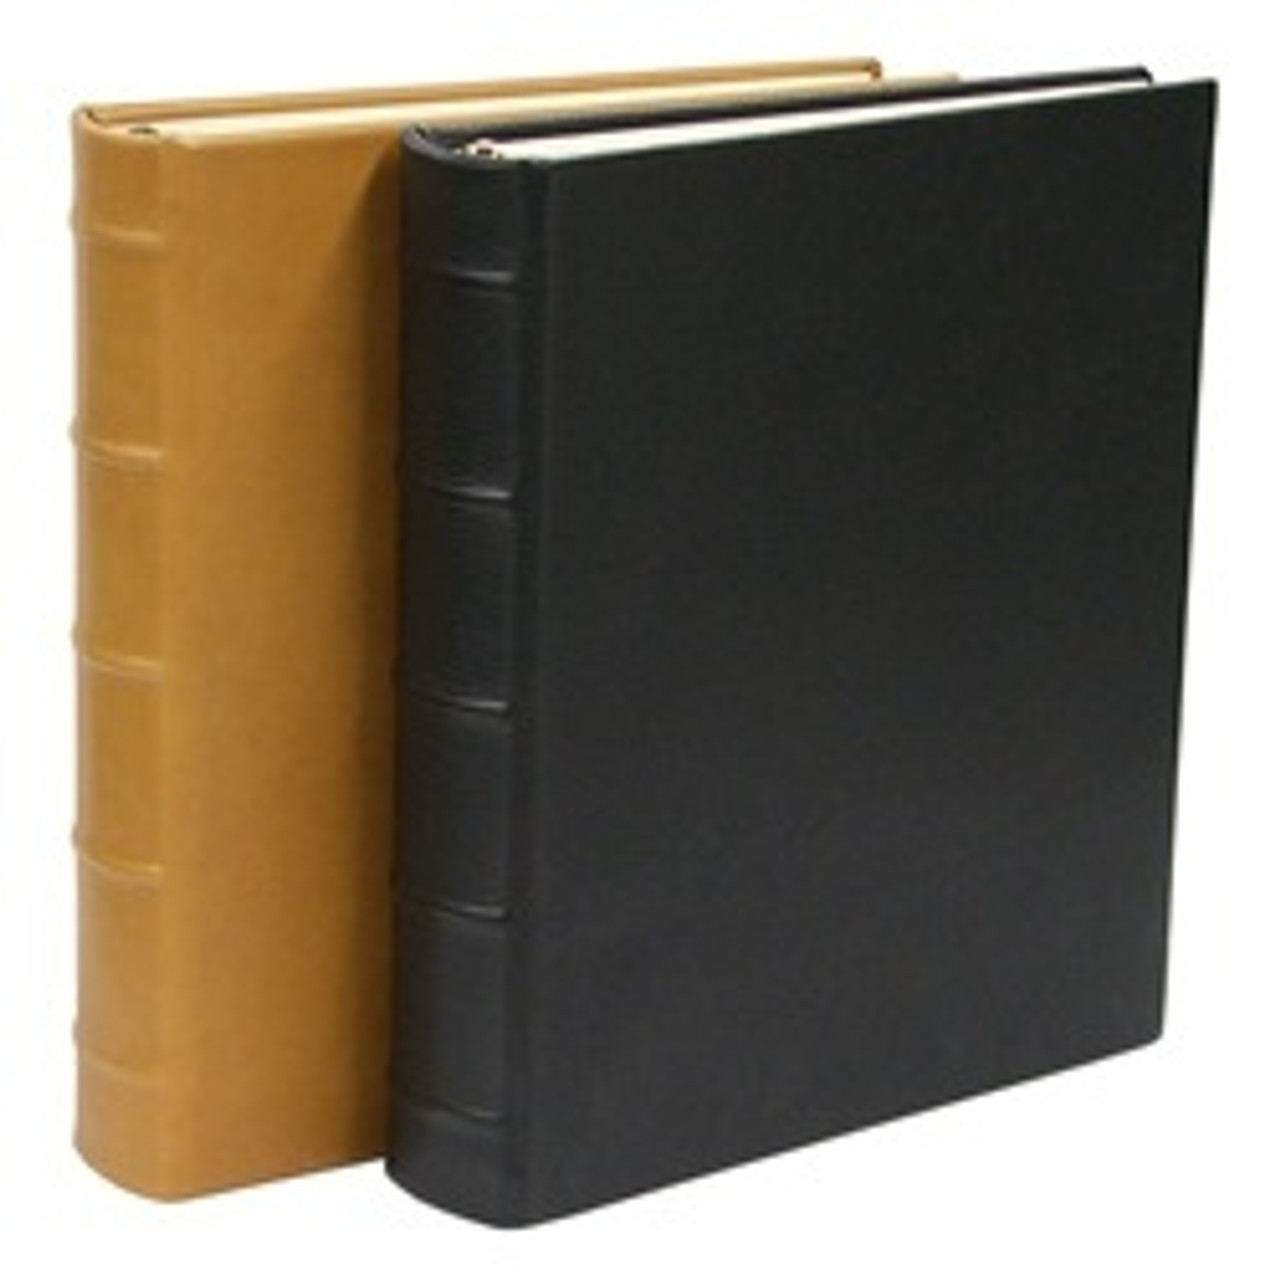 Charles River Leather Loose-Leaf 3-Ring-bound Album - 10.5 x 12